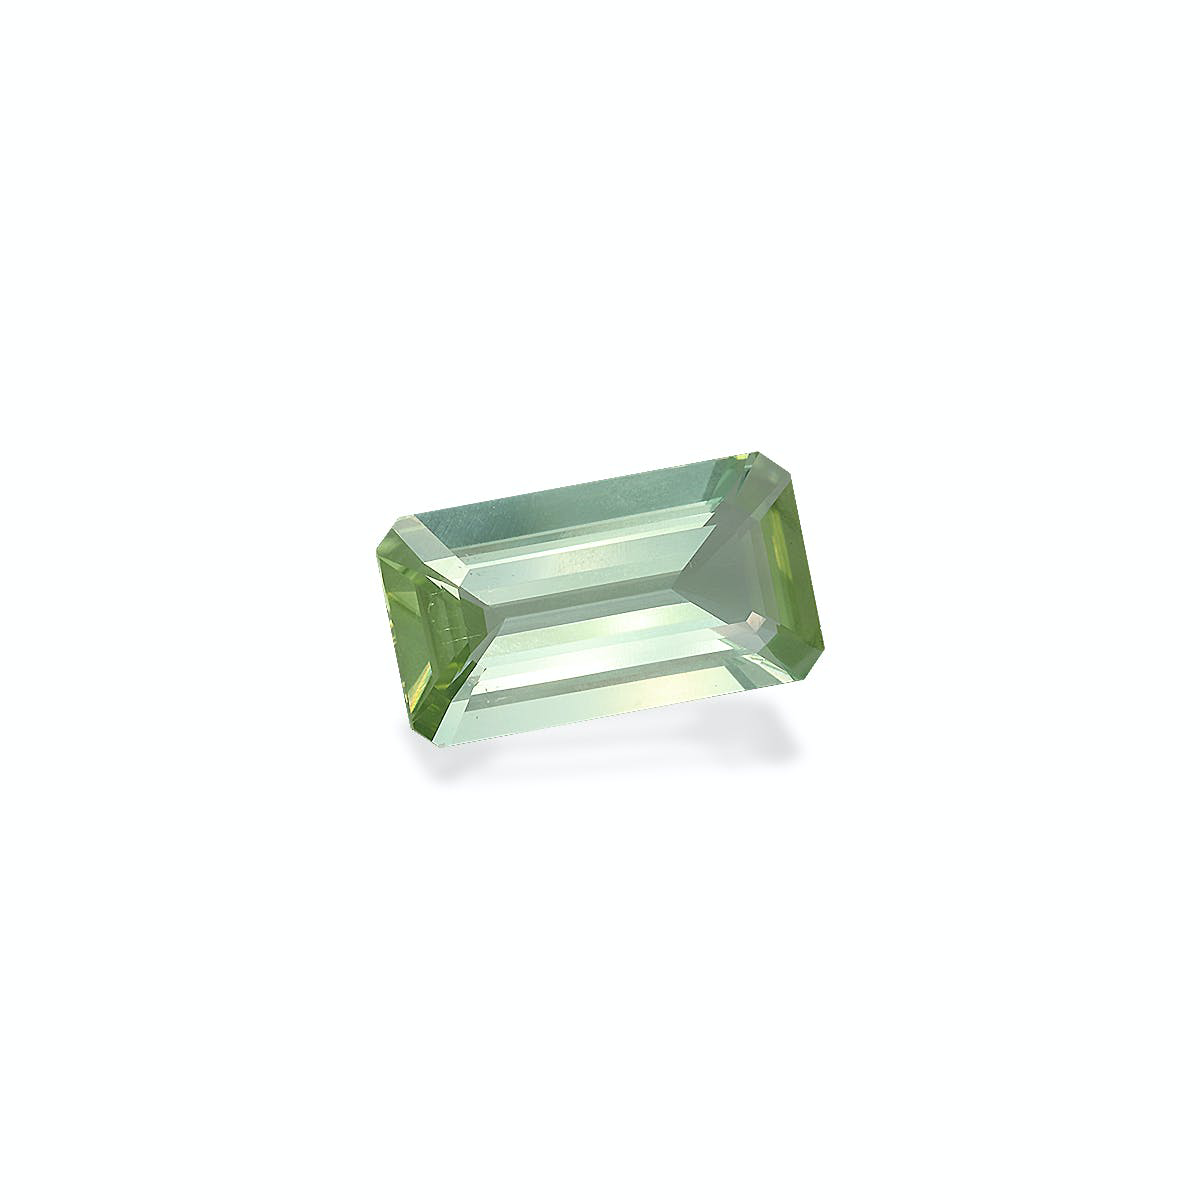 Picture of Pistachio Green Tourmaline 11.11ct (TG1264)